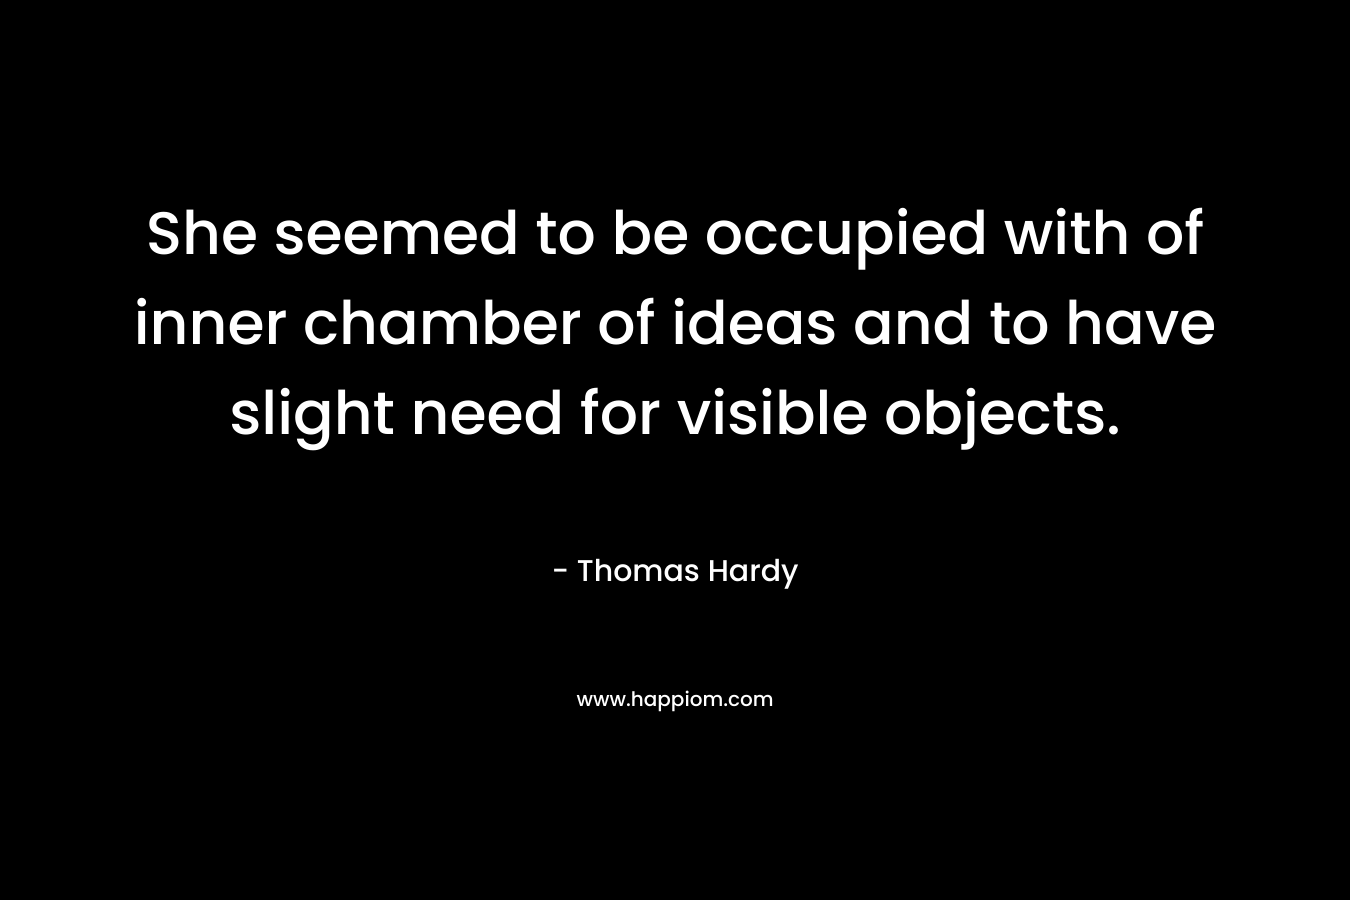 She seemed to be occupied with of inner chamber of ideas and to have slight need for visible objects. – Thomas Hardy